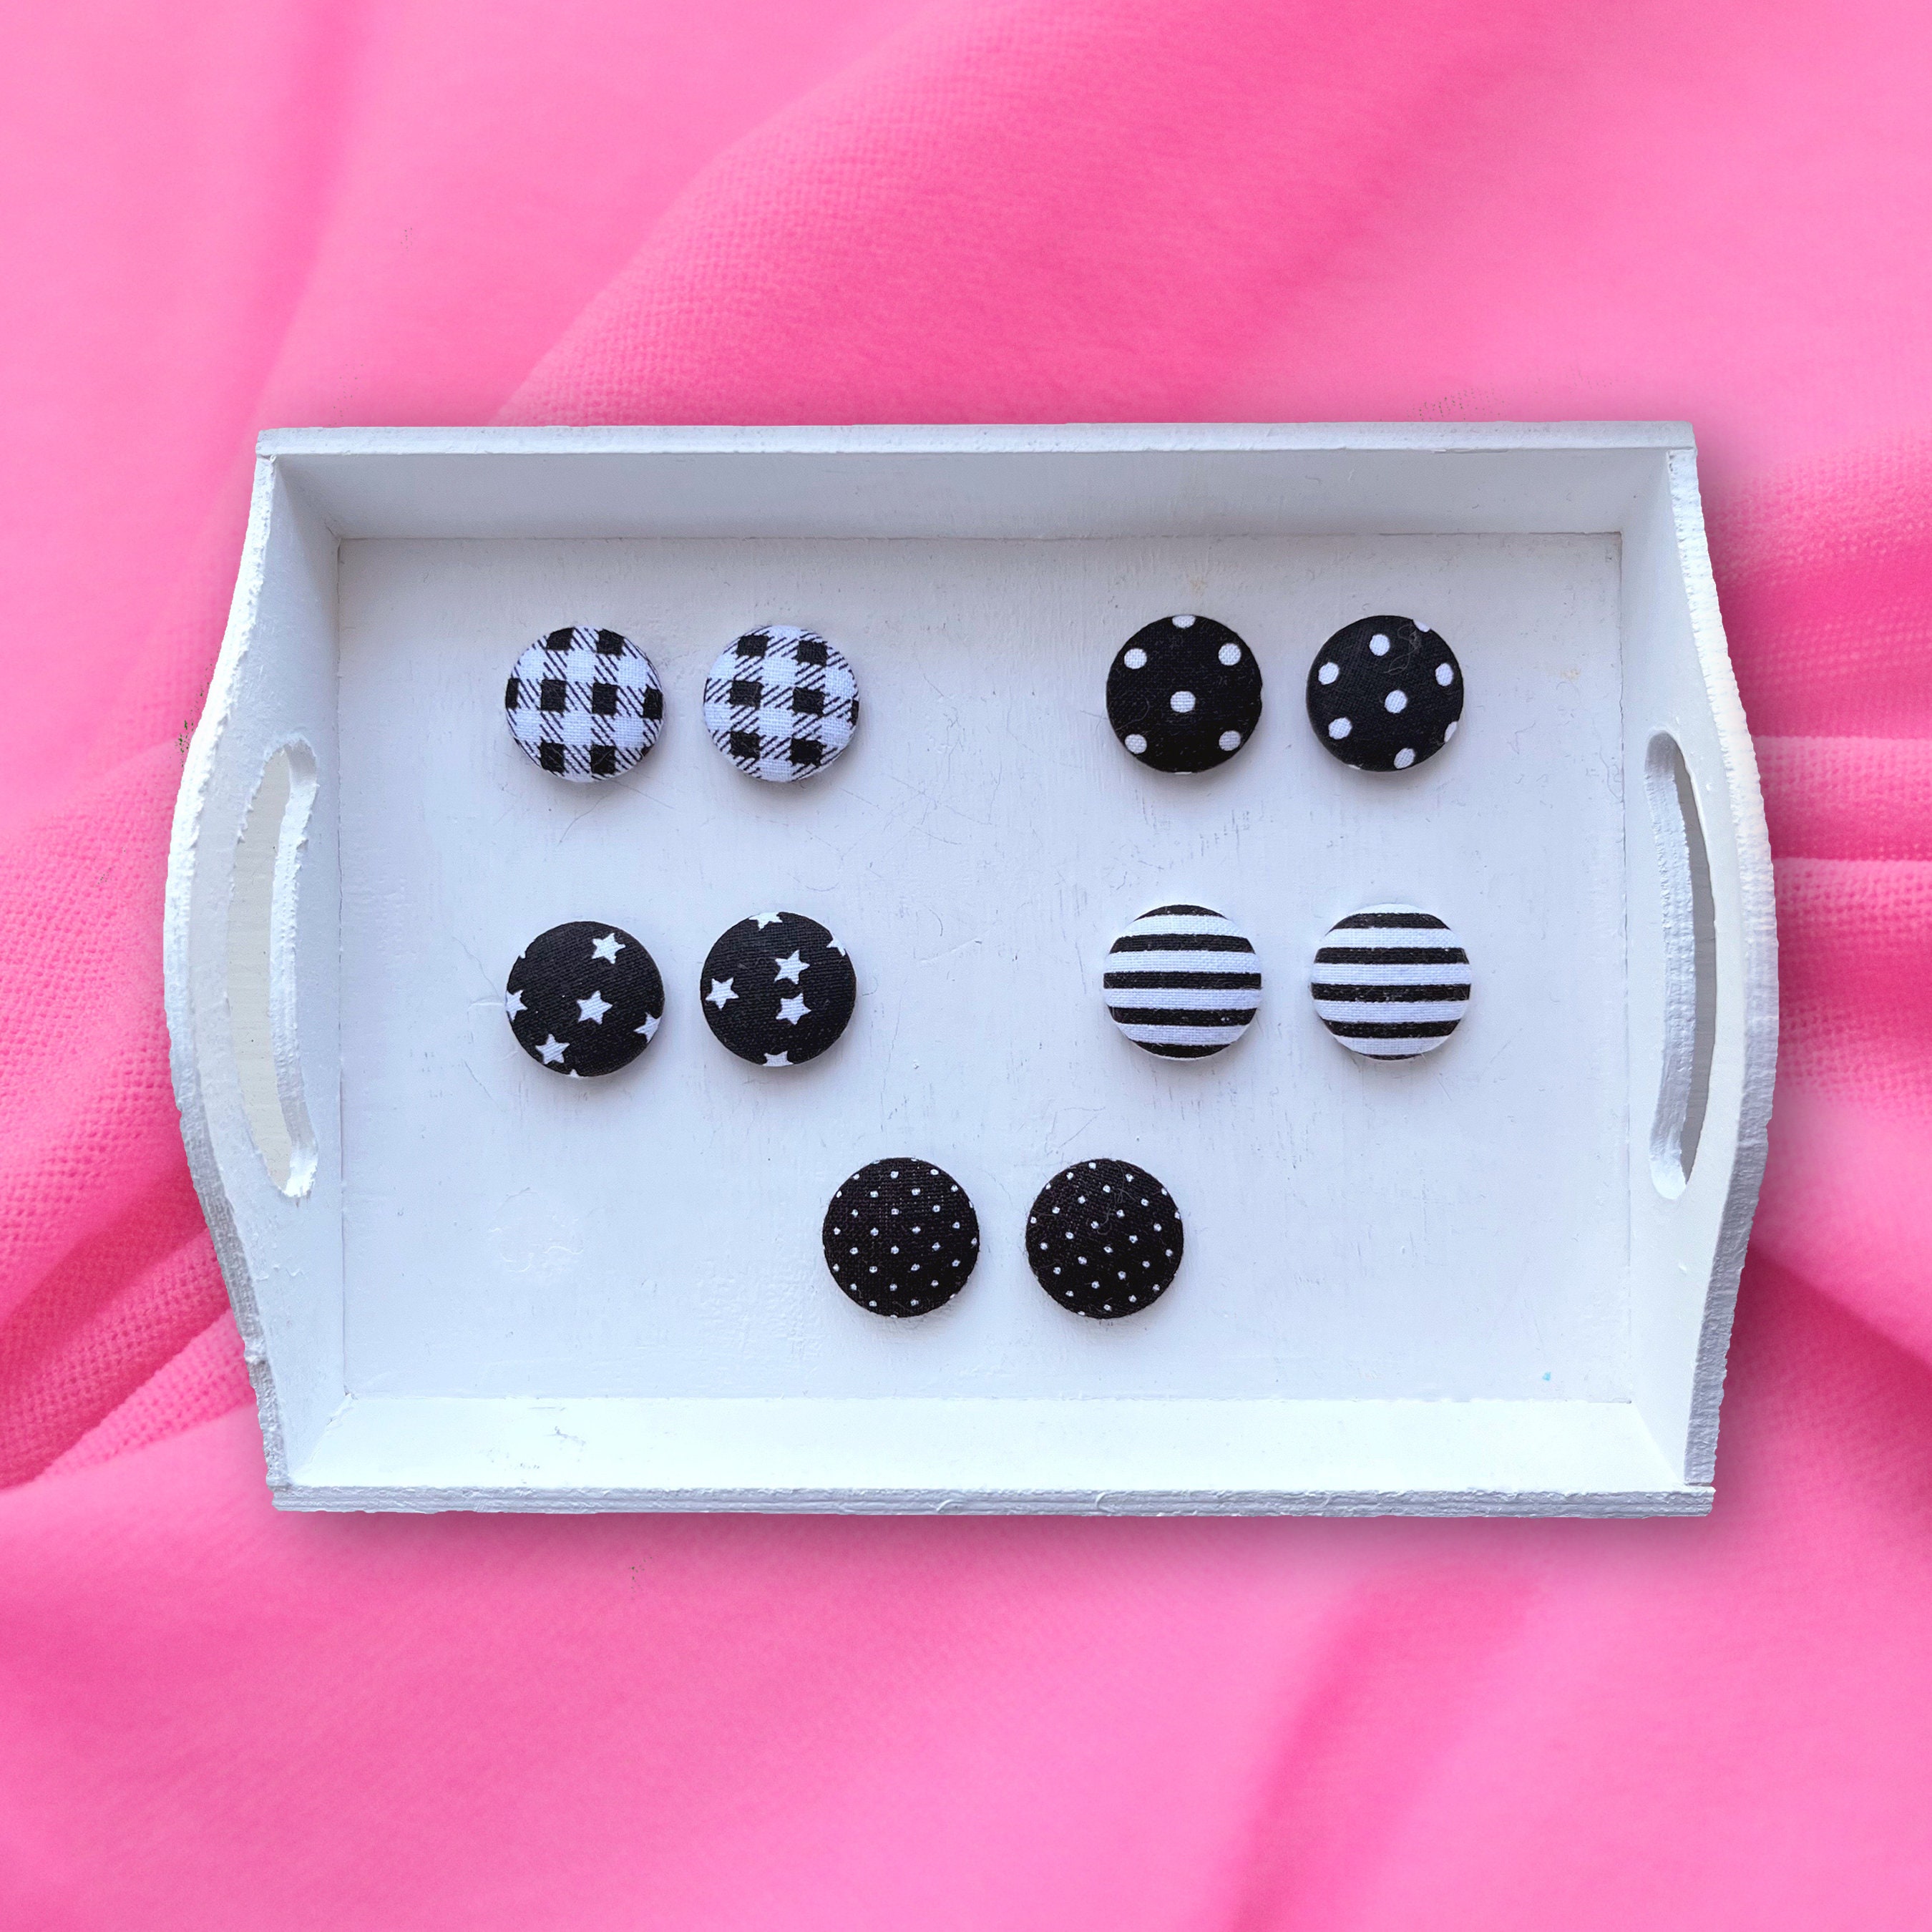 10 Fabric Cover Button Earrings DIY ten KIT Stud Stainless Steel 15mm NEW  STYLE | eBay